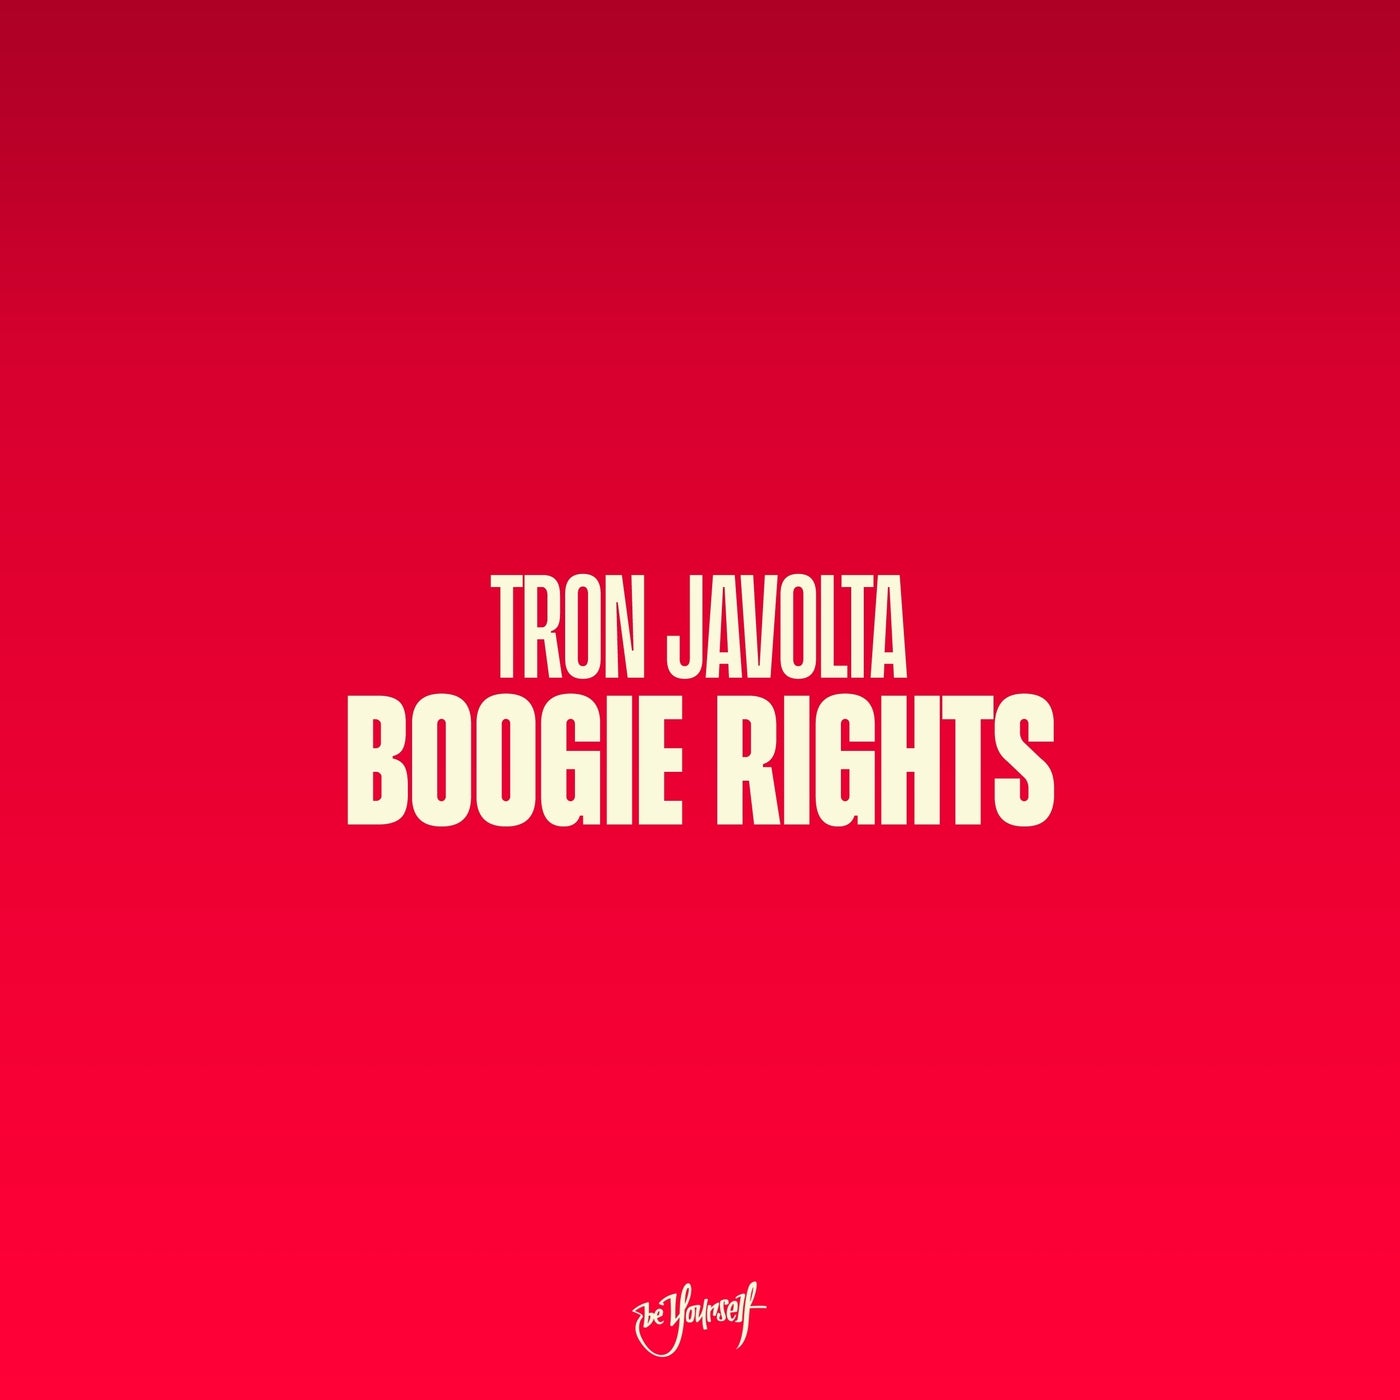 Boogie Rights